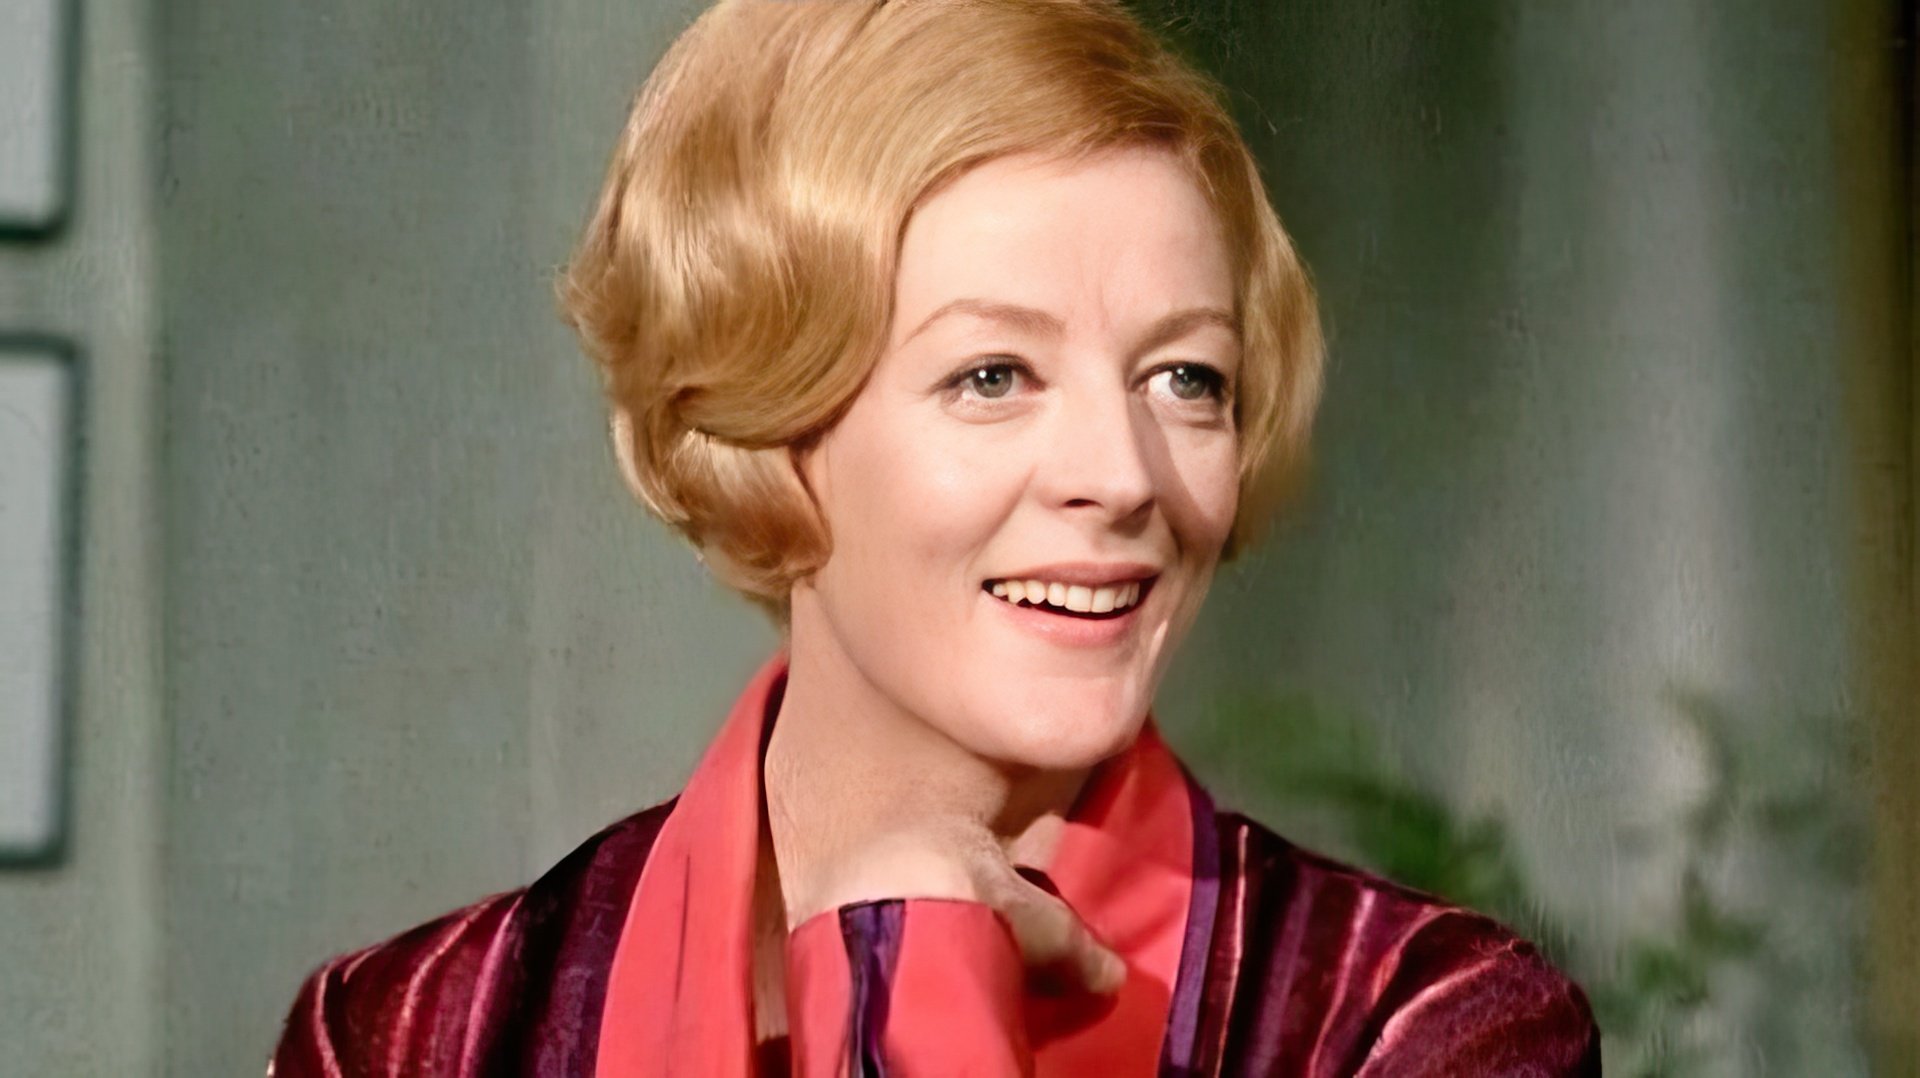 Maggie Smith won her first Oscar for her role as Jean Brodie.